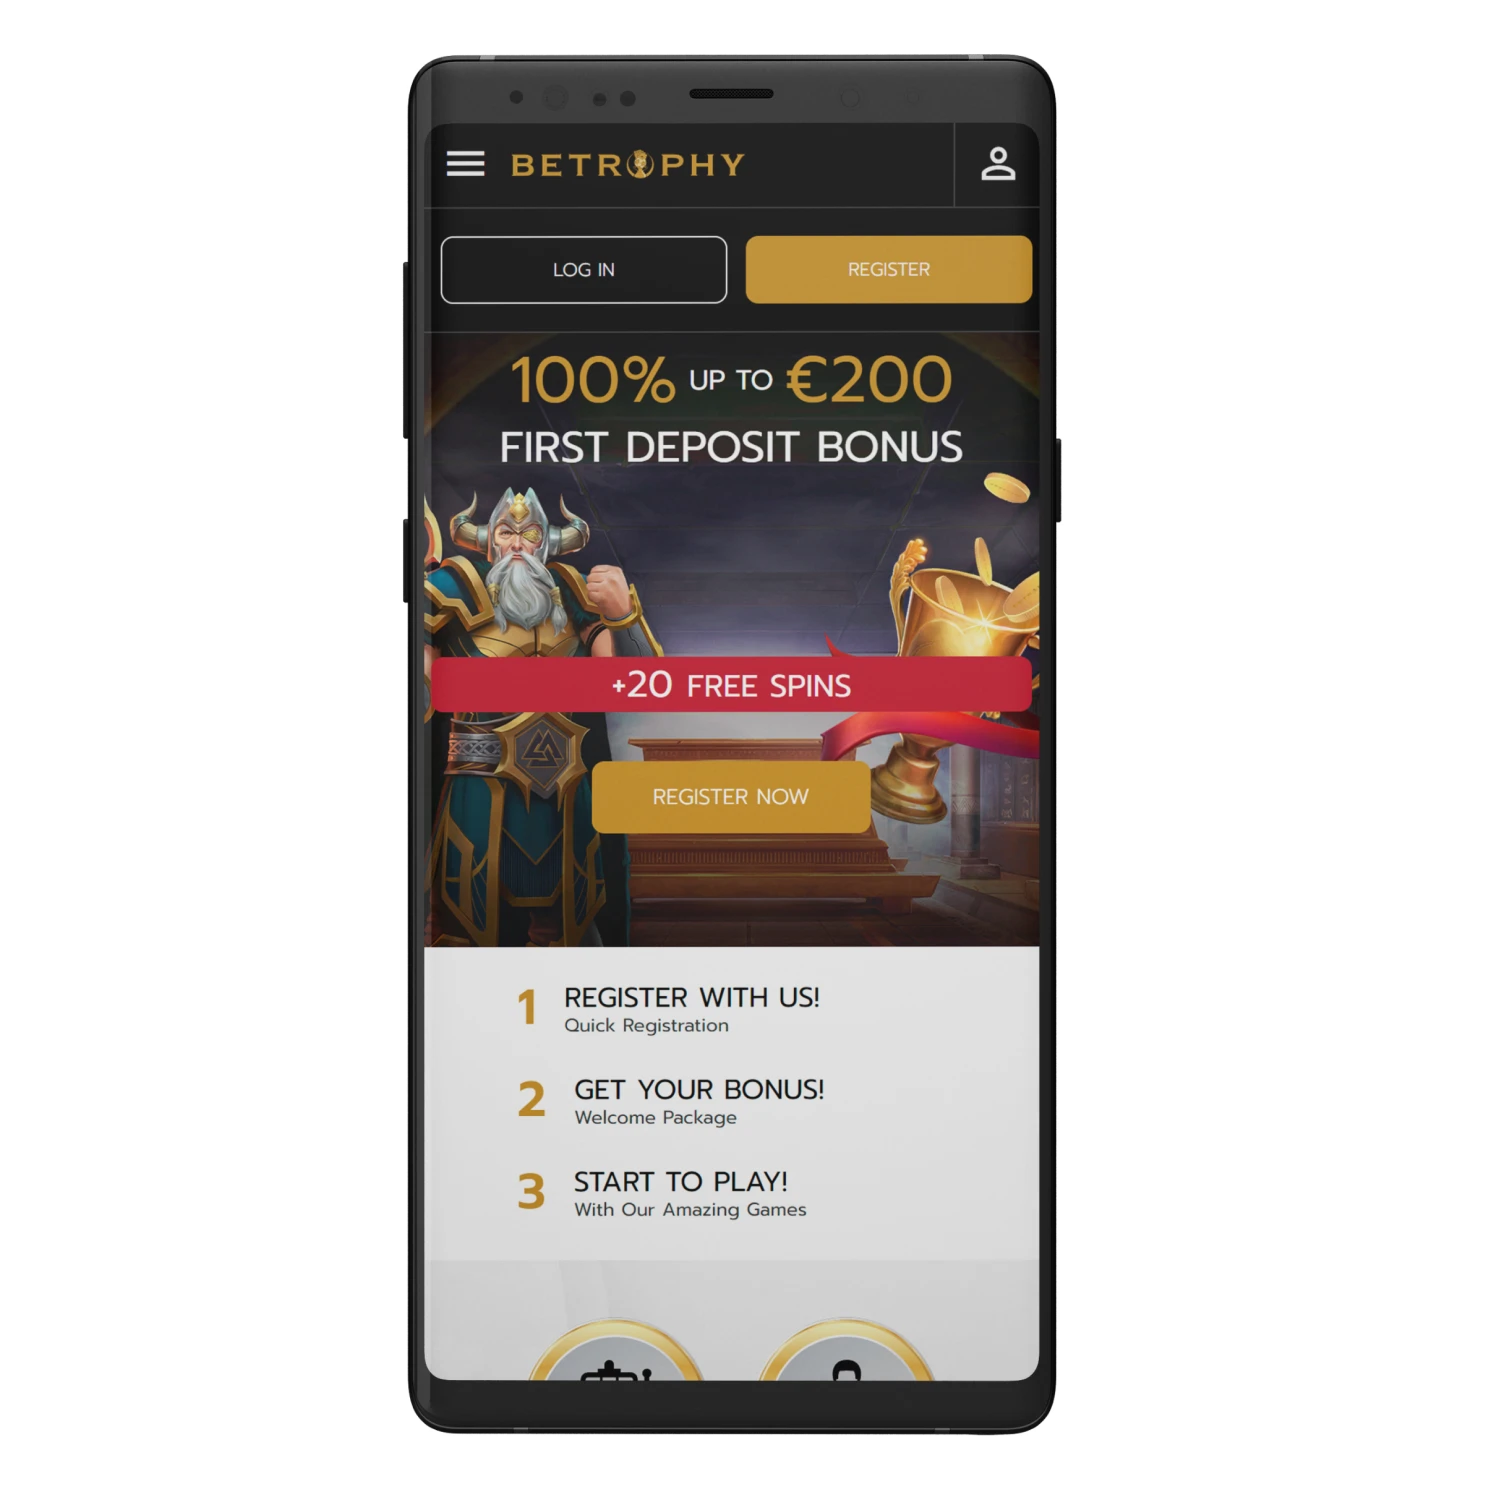 Play and bet in the Betrophy app.